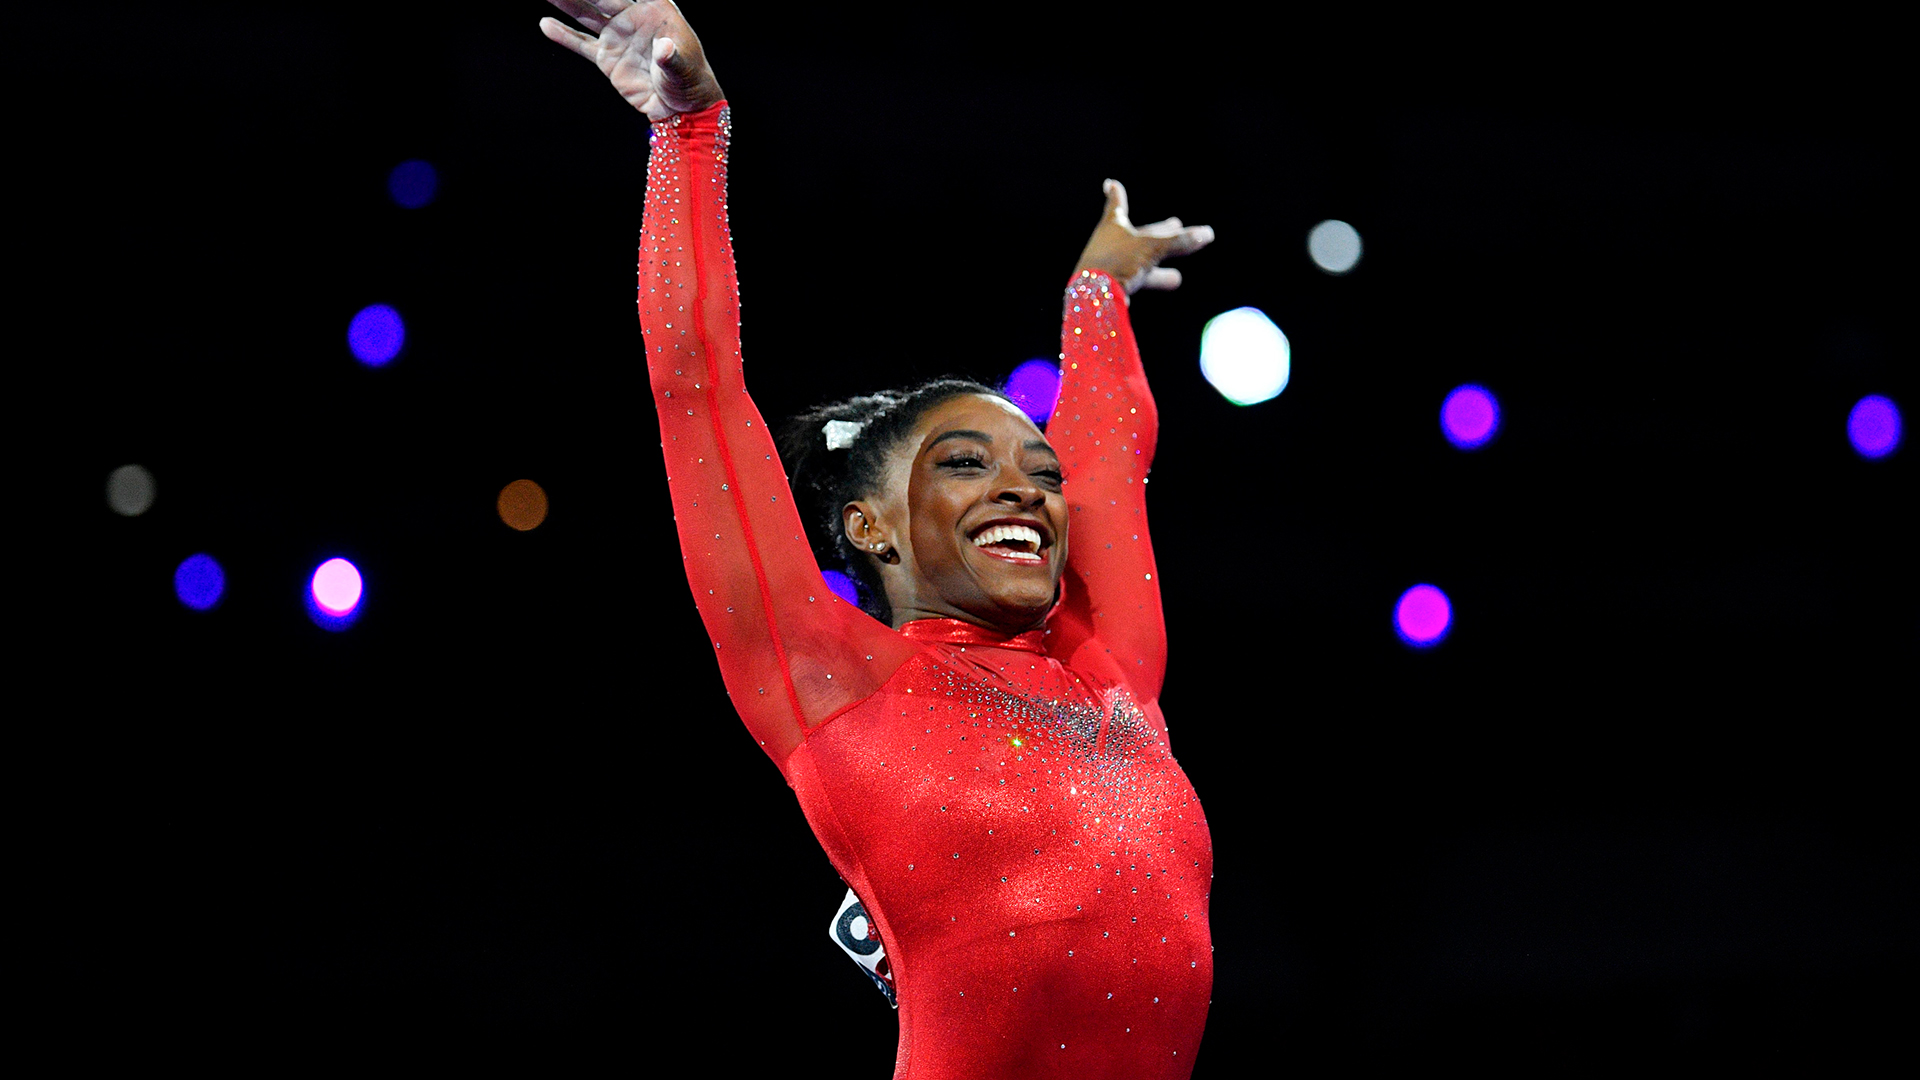 Twitter Declares Simone Biles The 'GOAT' With New Emoji Ahead Of The Tokyo Olympics